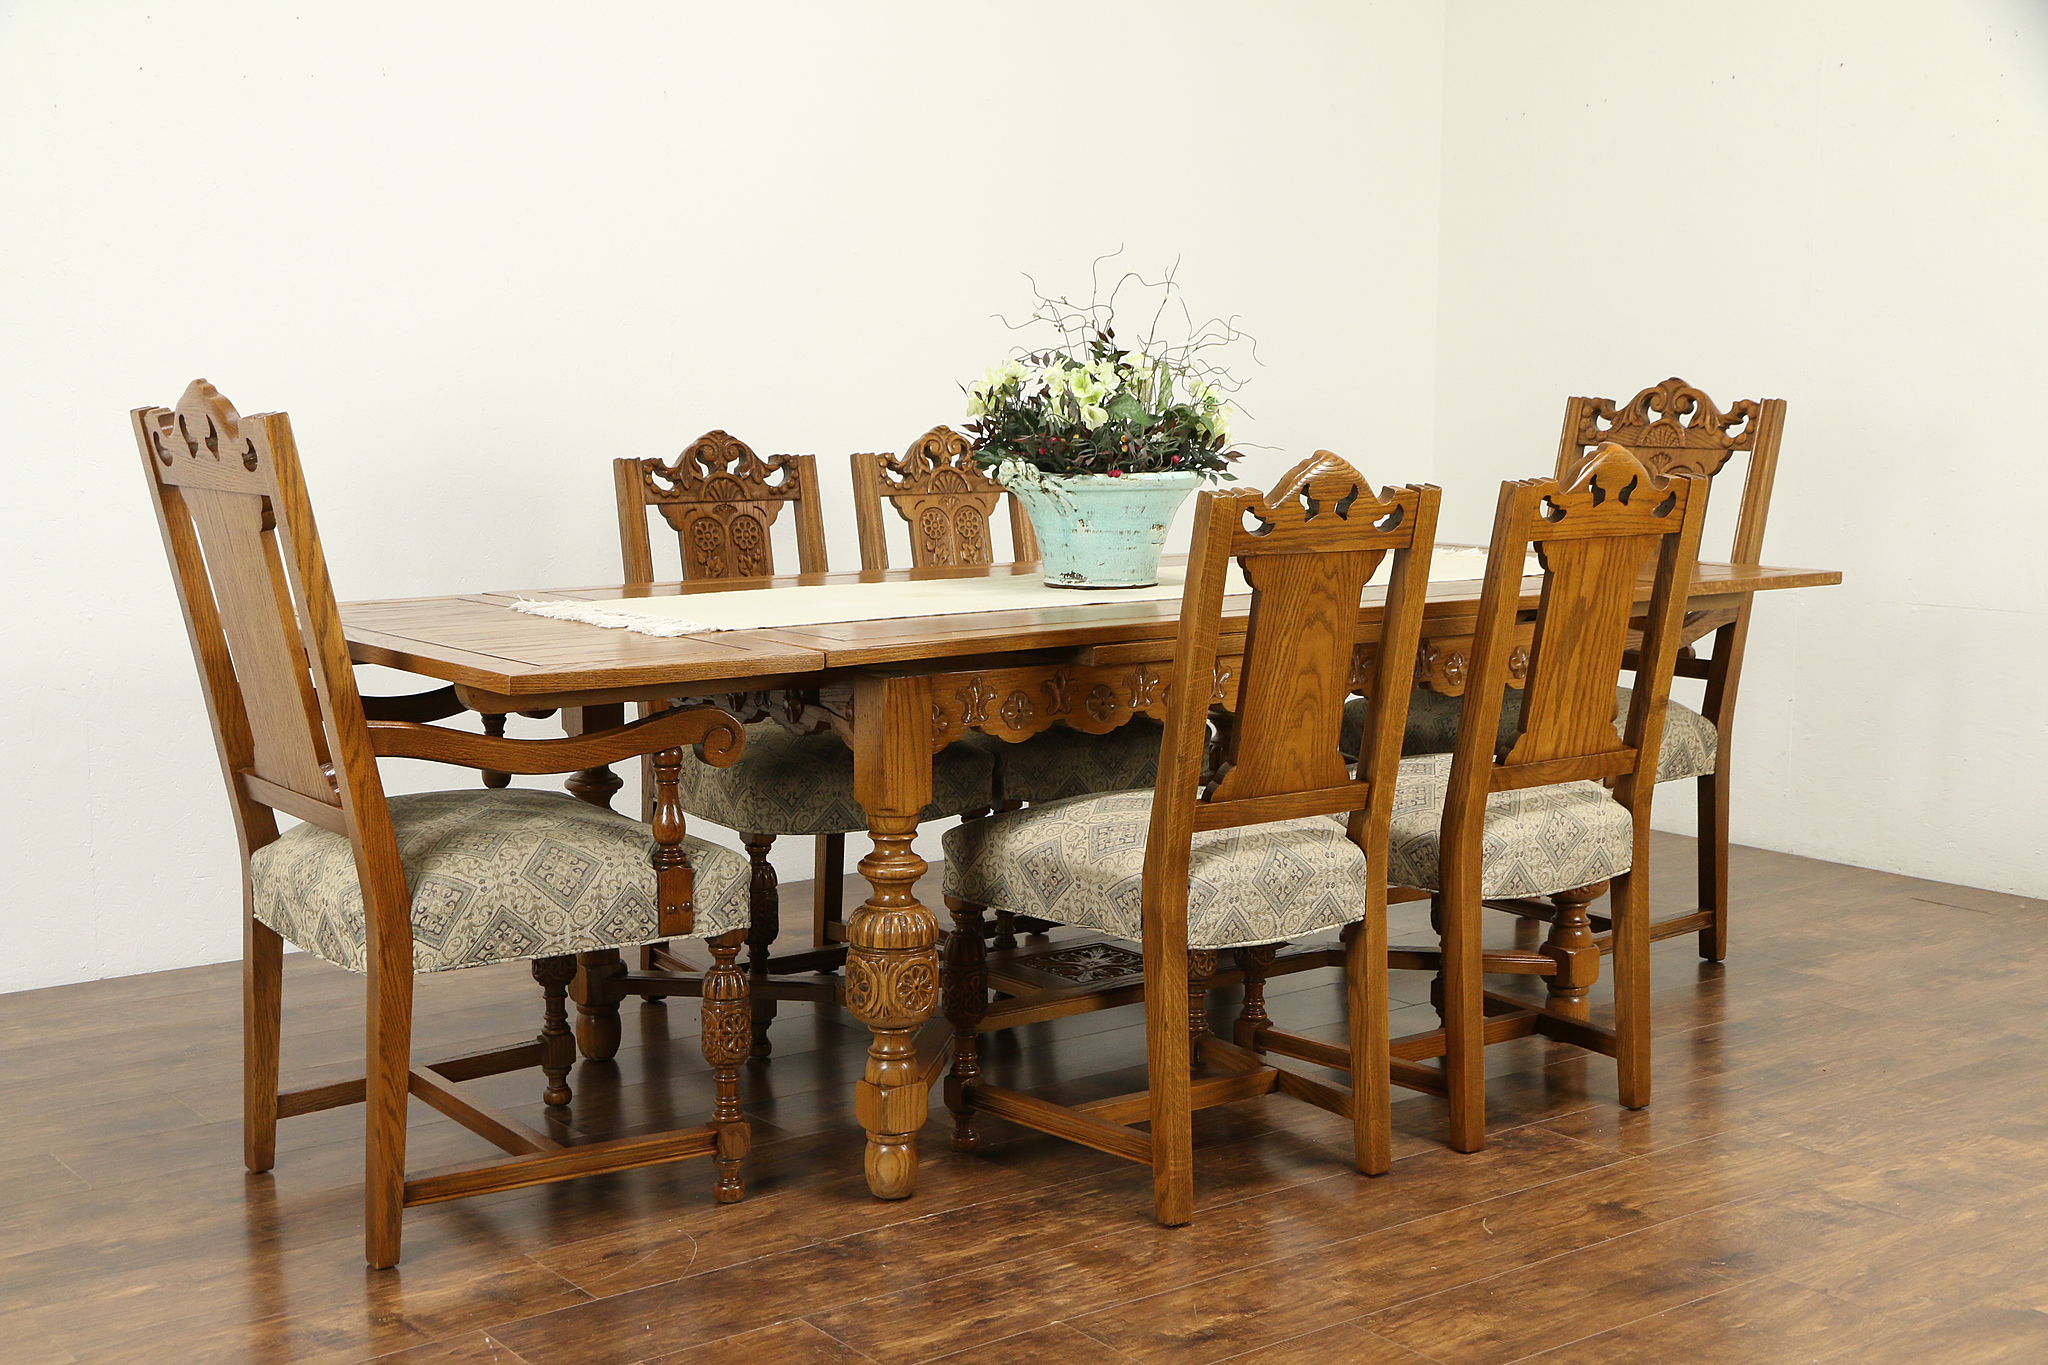 Sold English Tudor Antique Oak Dining Set Table 6 Chairs 32782 Harp Gallery Antiques Furniture